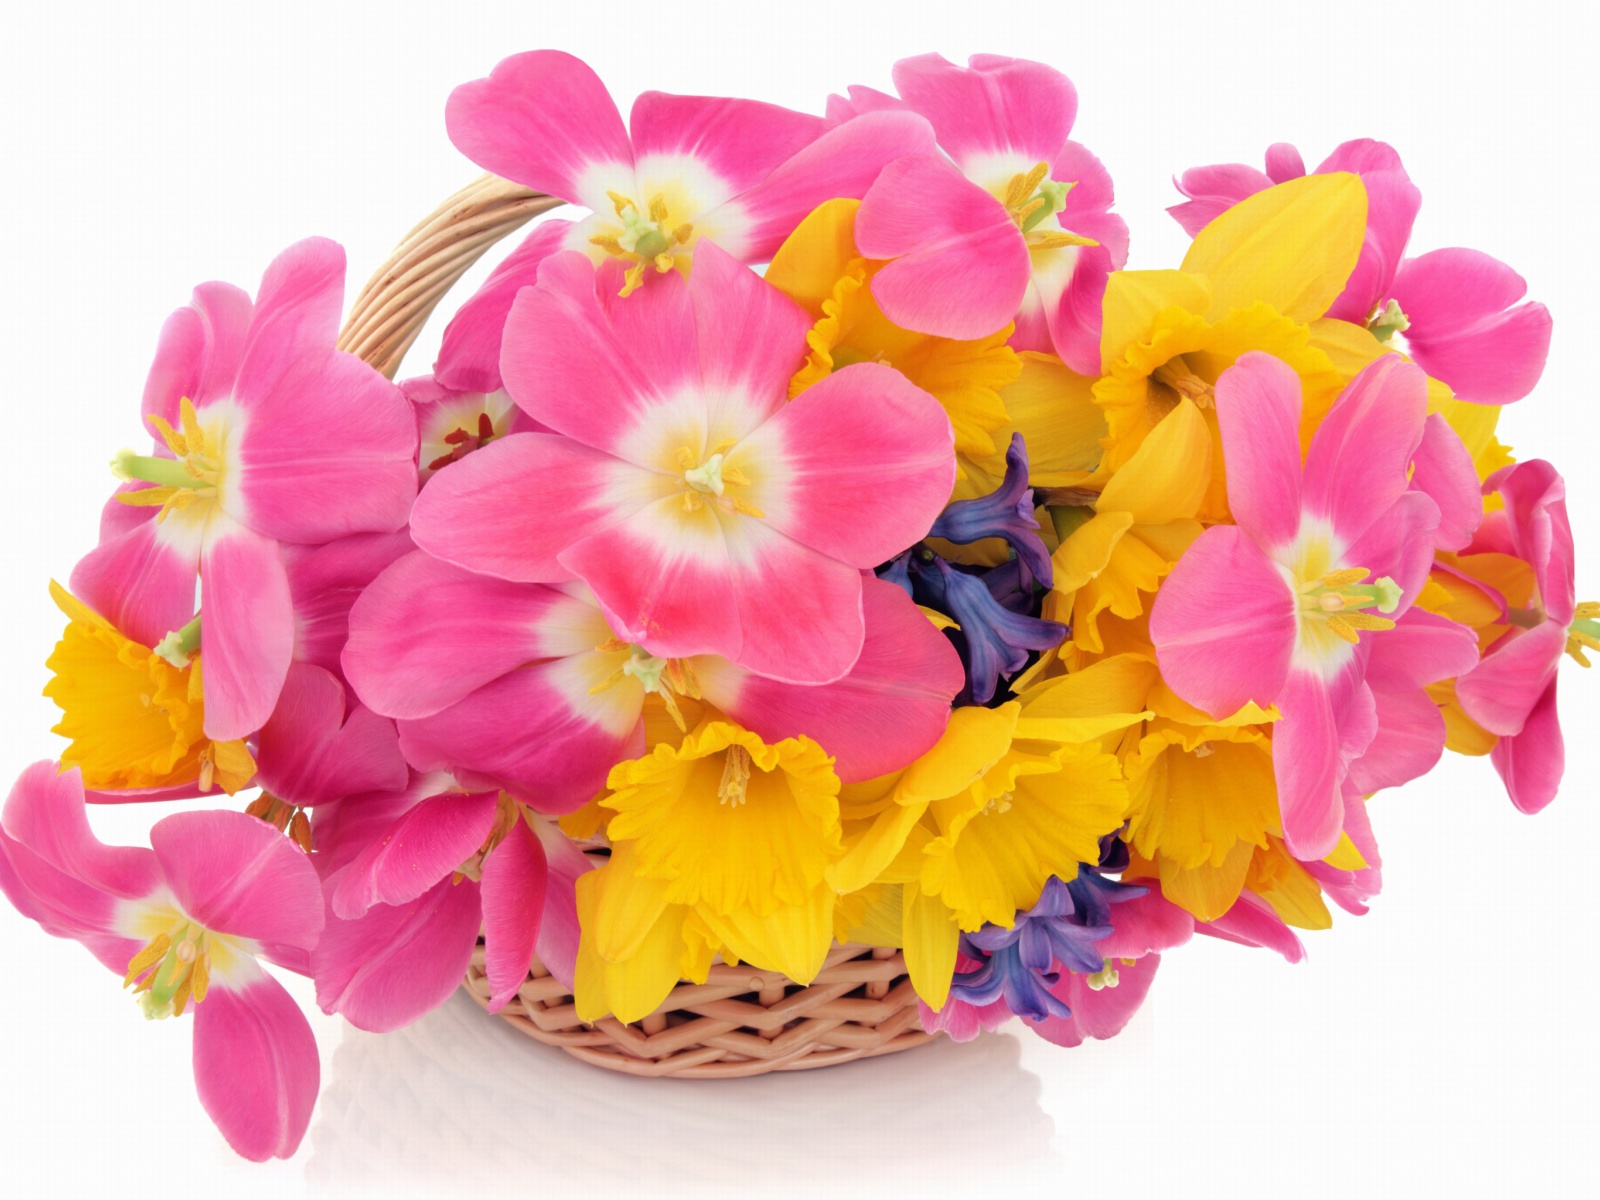 Das Indoor Basket of Tulips and Daffodils Wallpaper 1600x1200